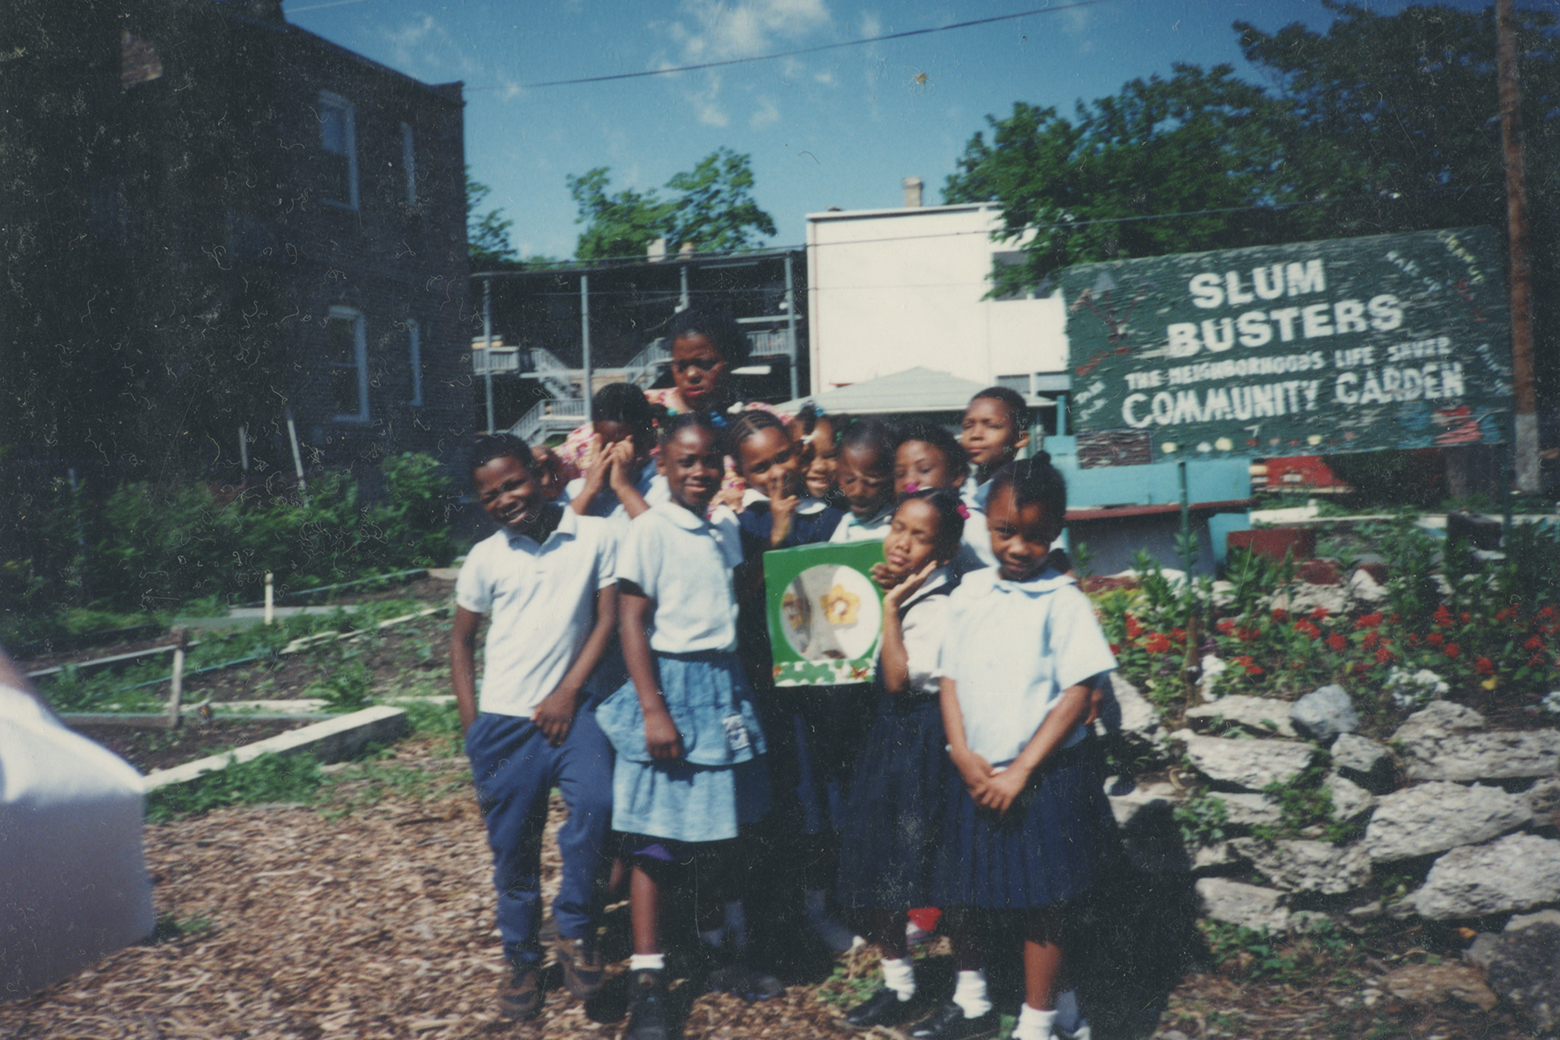 Slum Busters Community Garden by Gerald and Lorene Earles, 